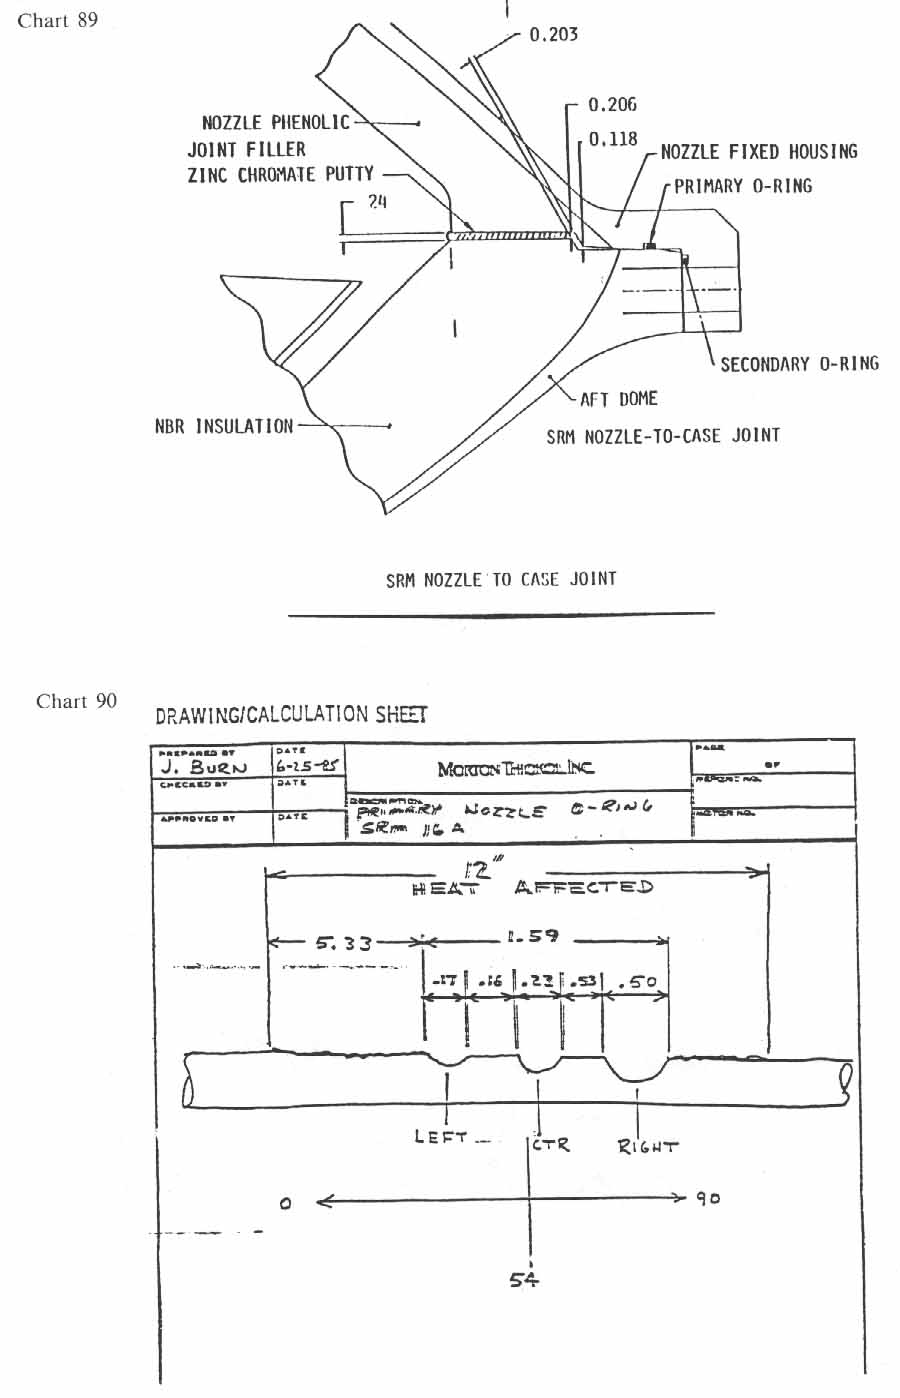 charts 89-90 [Chart 89: SRM nozzle to case joint; Chart 90: Drawing/calculation sheet]